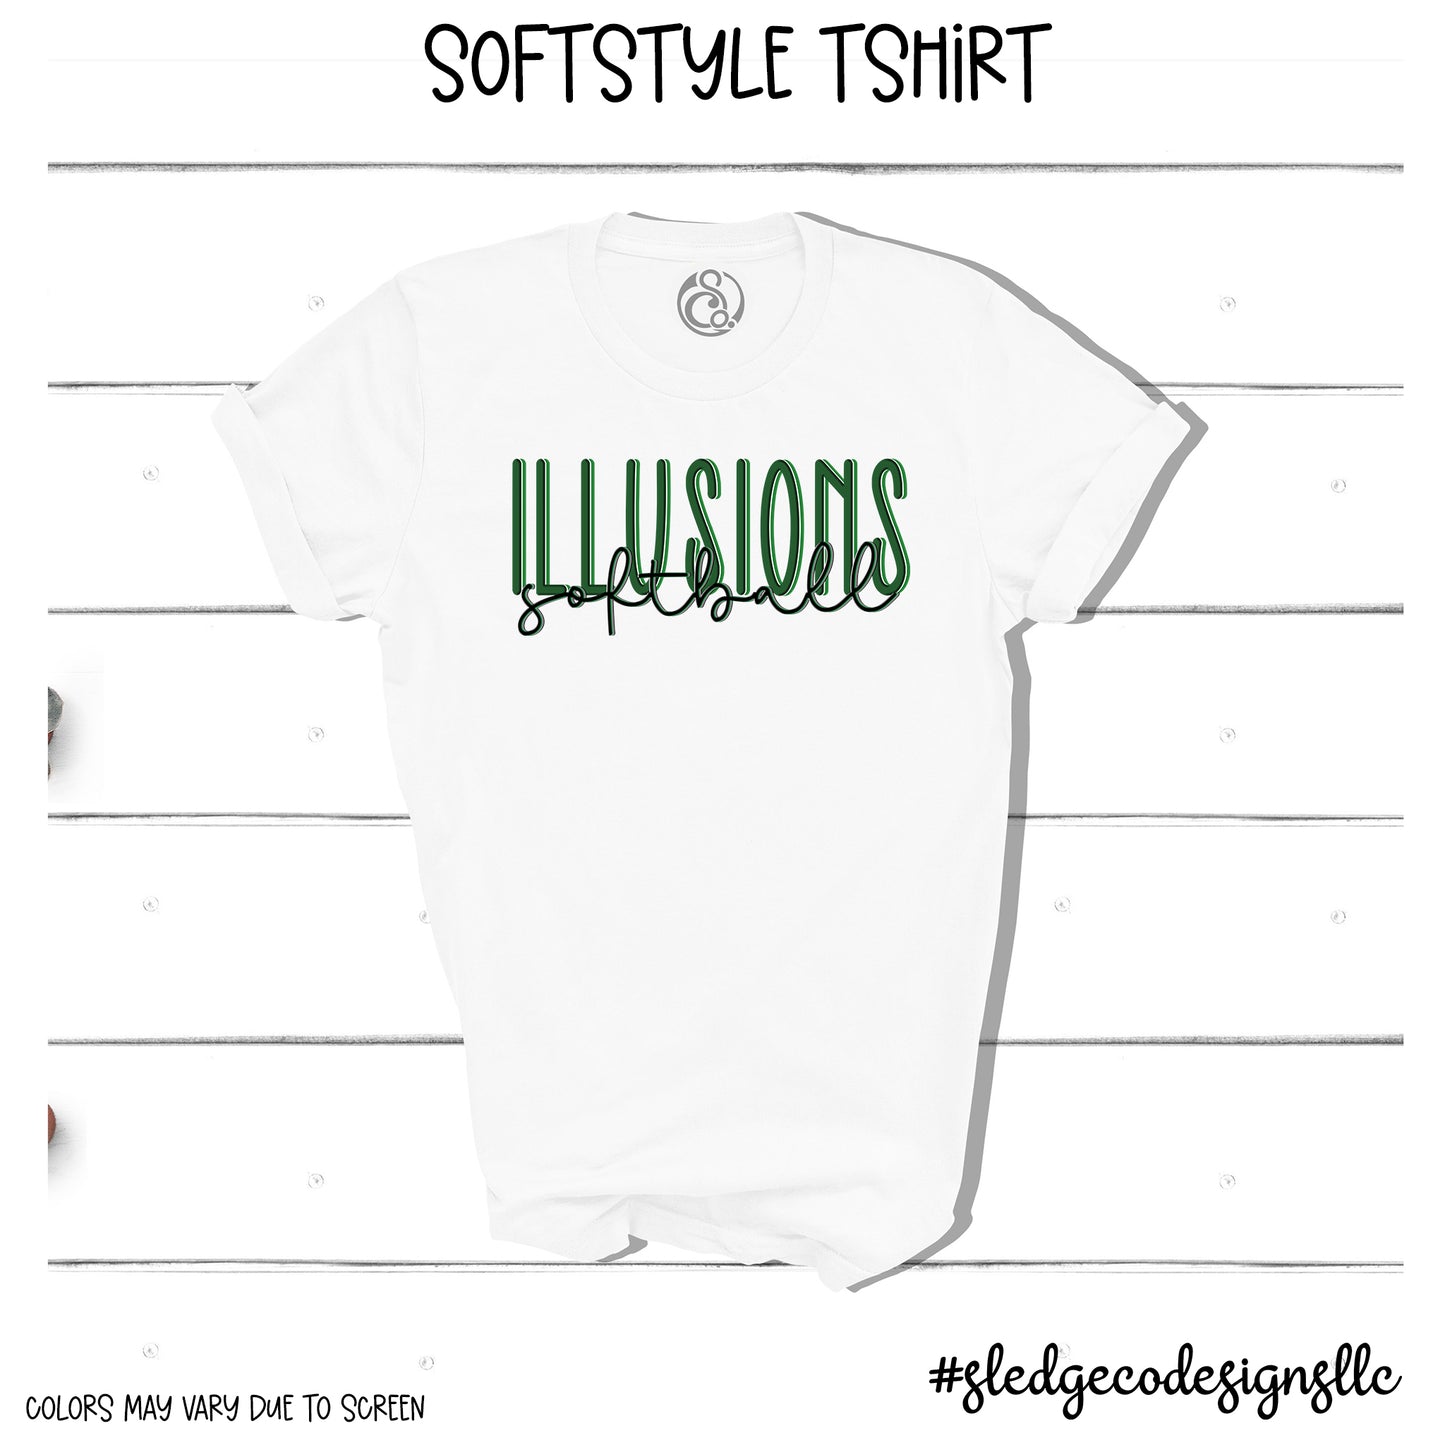 ILLUSIONS SOFTBALL DUO | SOFTSTYLE TEE | MADE TO ORDER